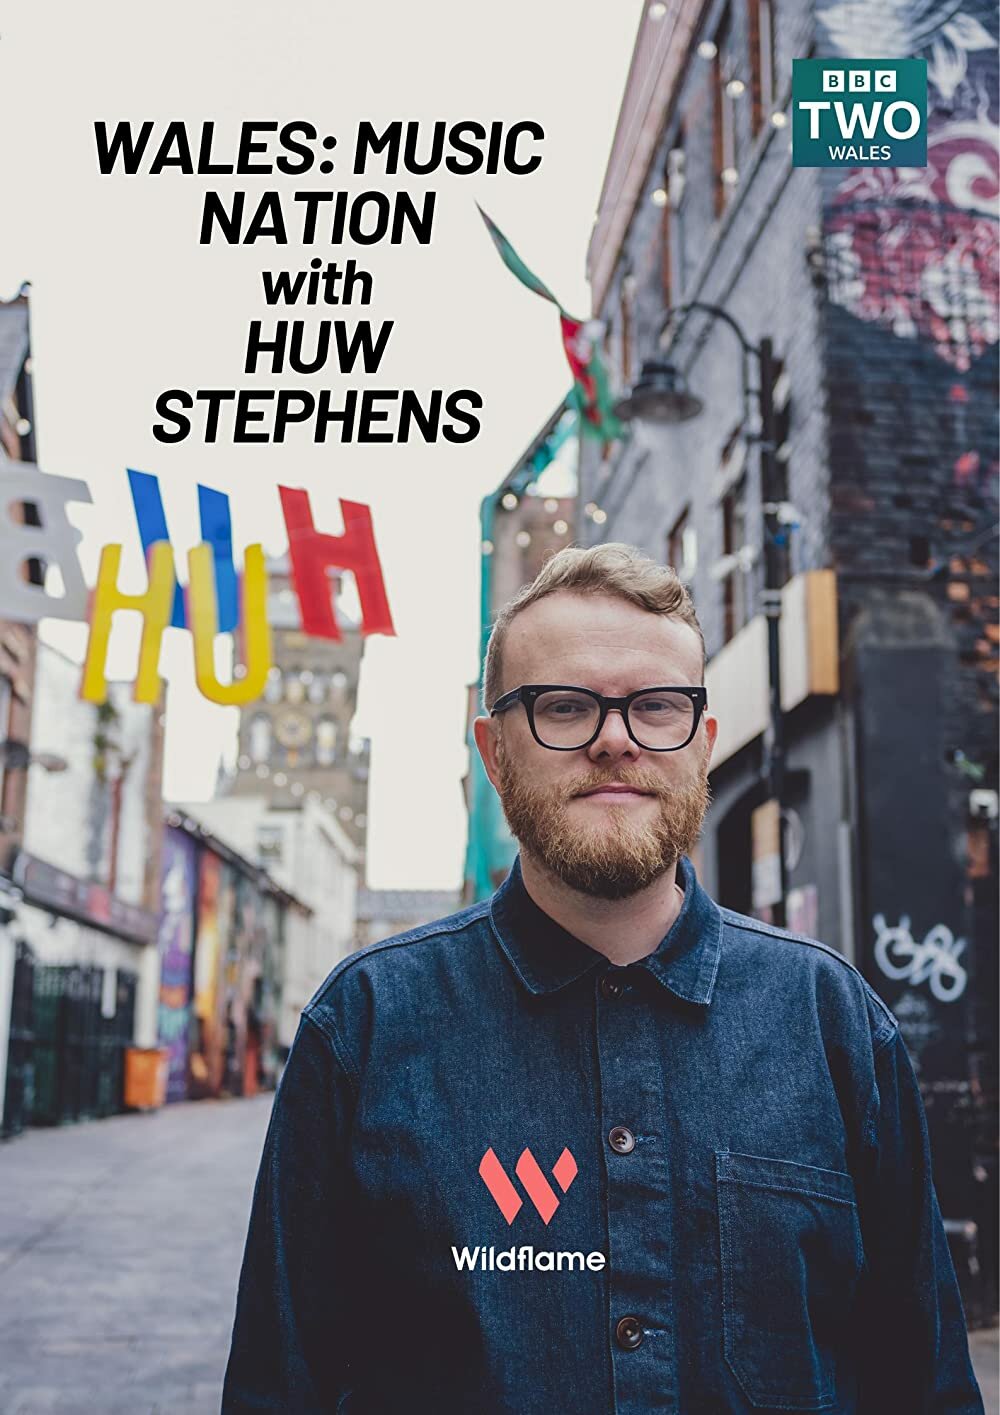 Wales: Music Nation with Huw Stephens ne zaman